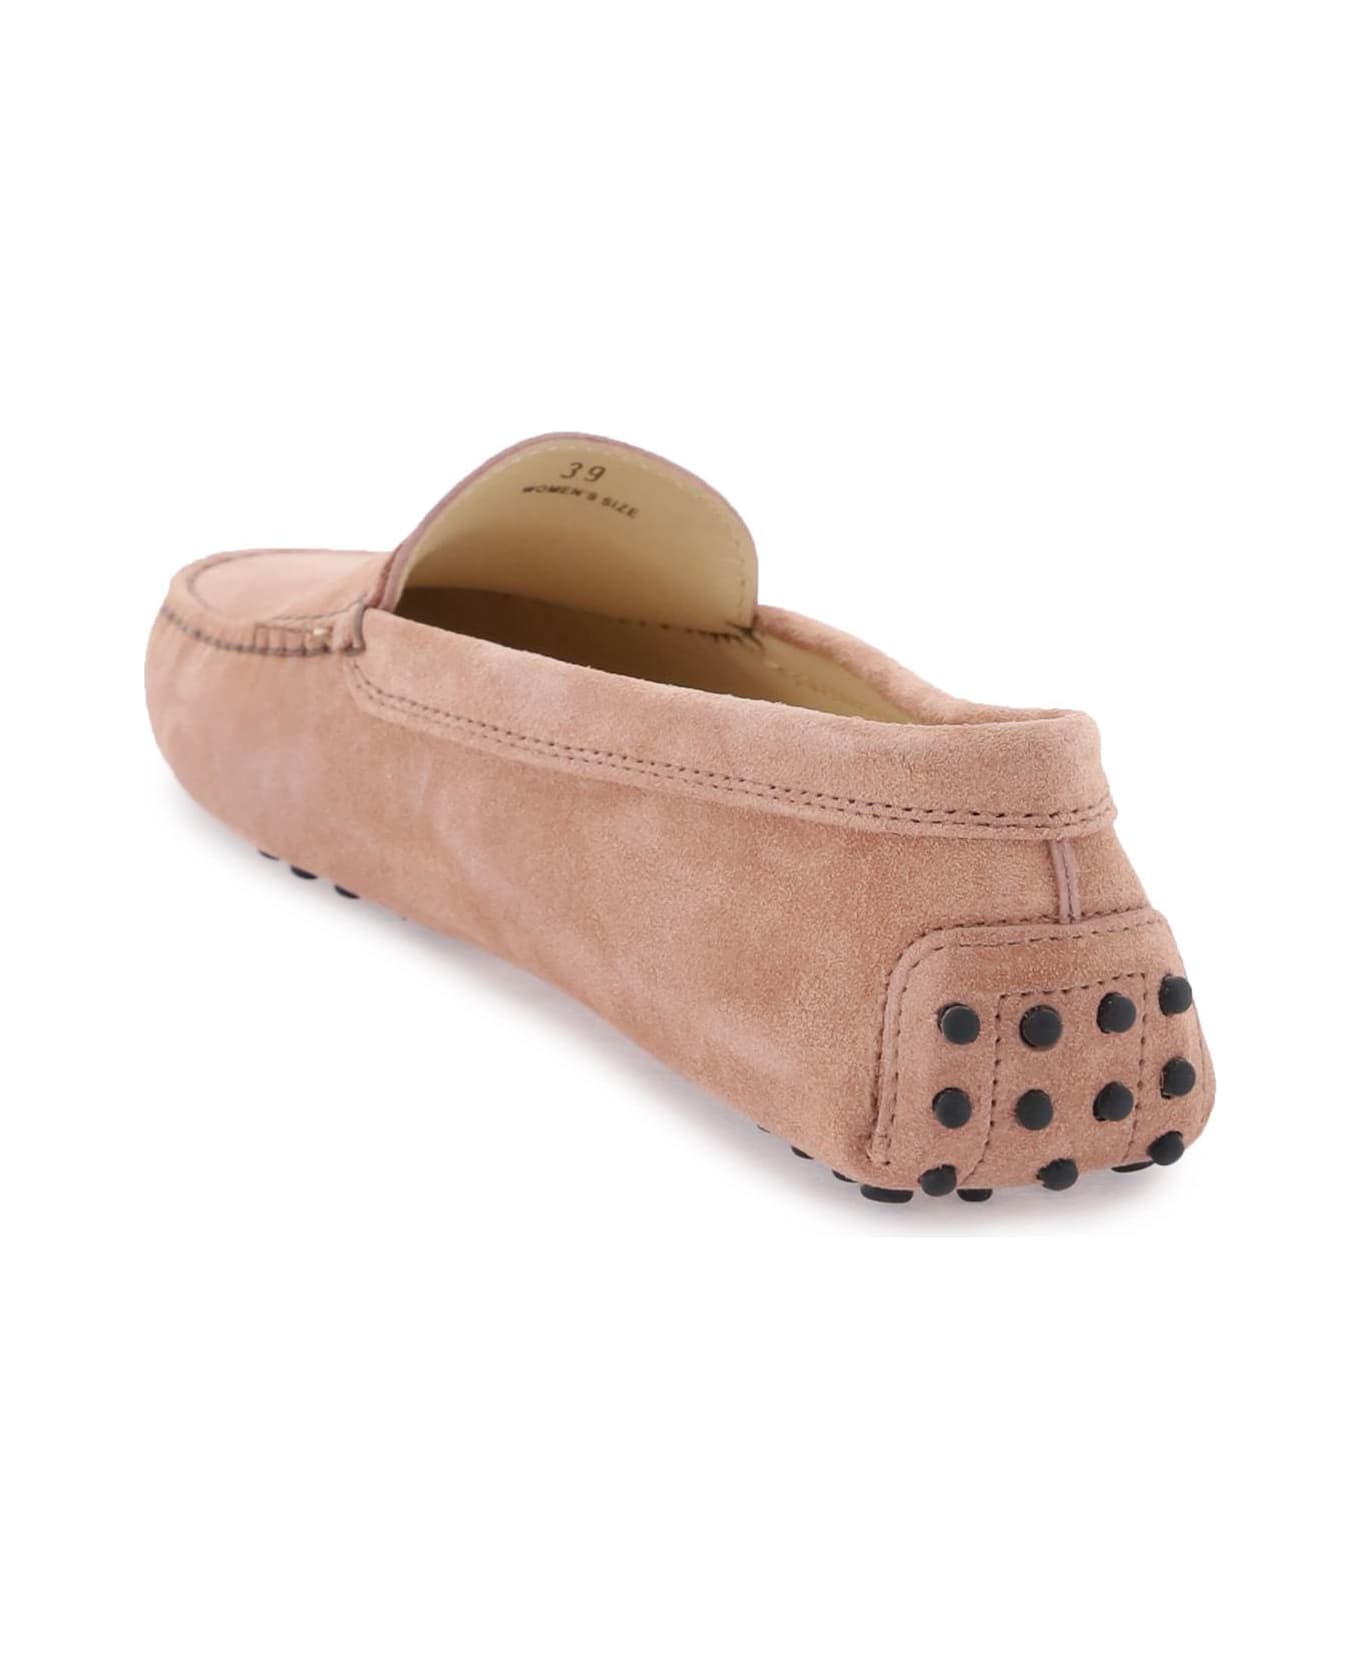 Tod's Gommino Loafers - COTTO CHIARO (Pink)